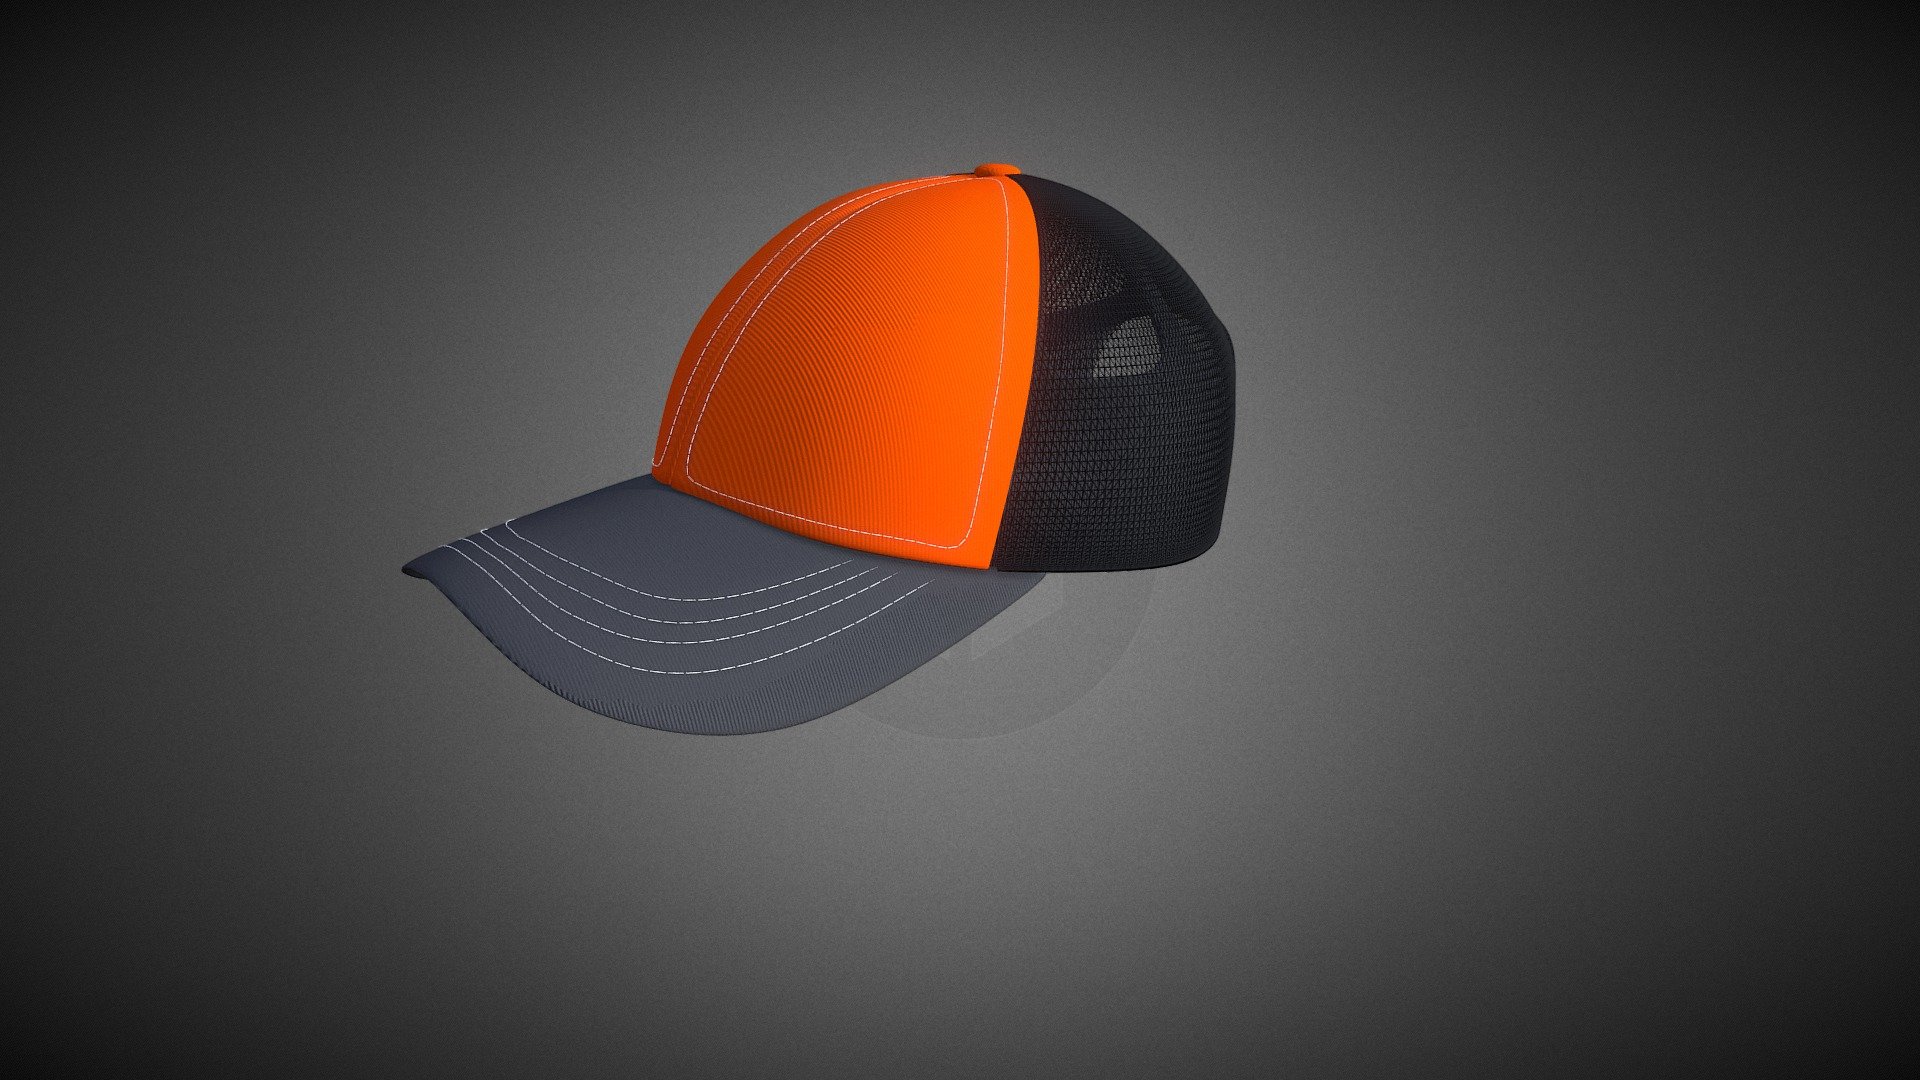 3d model of a cap I made using blender. 

Check out the rendered version on Youtube :) 
https://www.youtube.com/watch?v=AIZMlAl911s - Mesh Back Hat - 3D model by yousufmohd 3d model